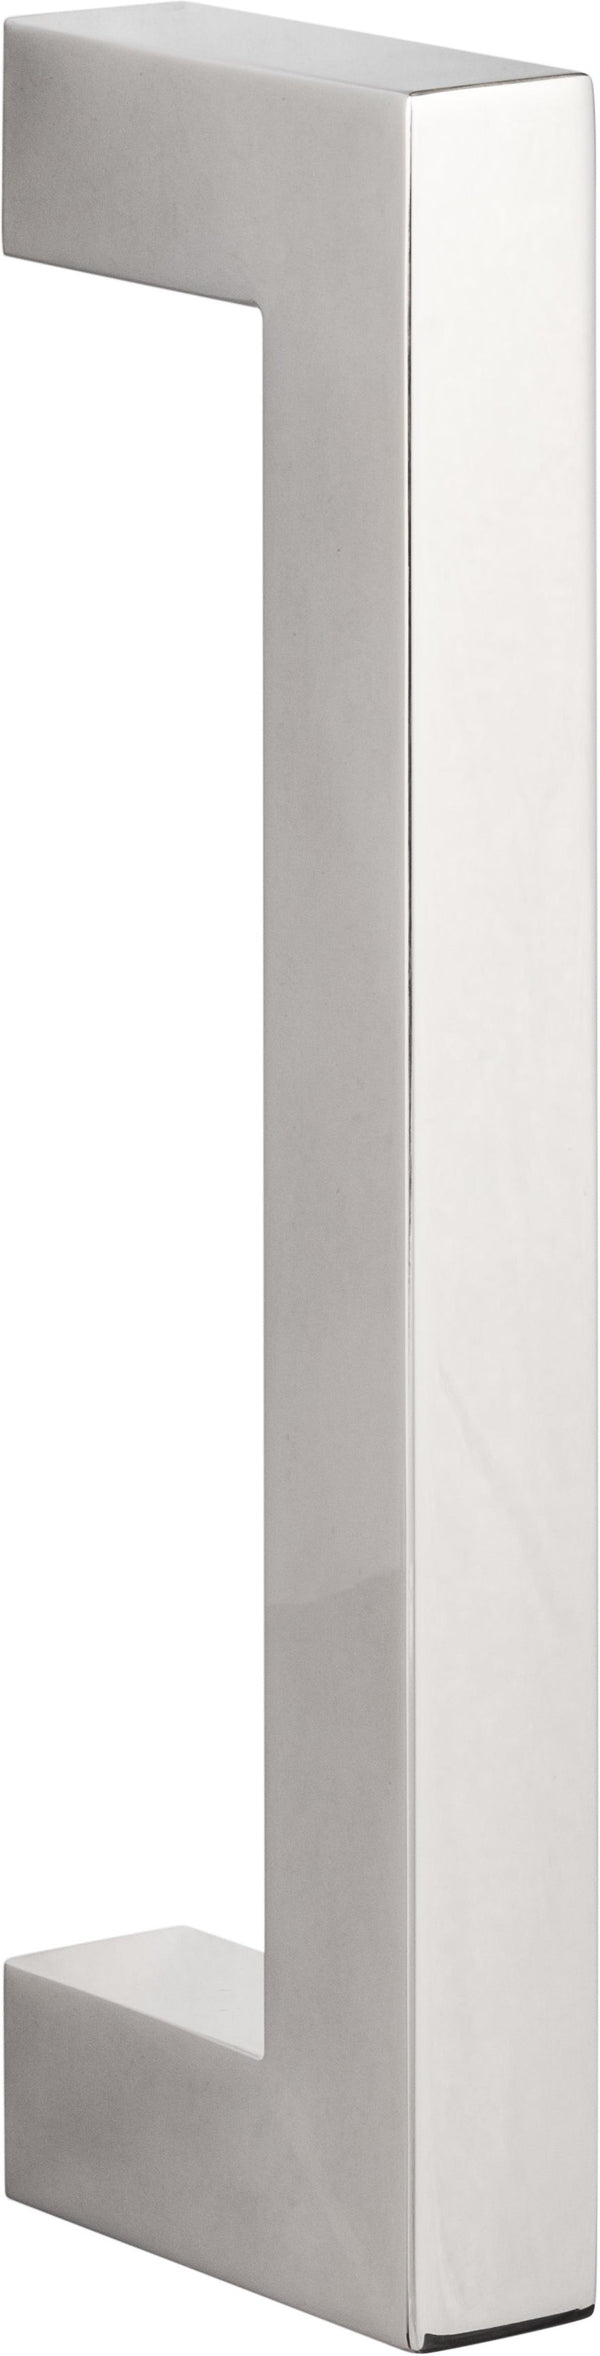 Sure-Loc Barn Door Handle, 8", Square, Single Sided in Polished Chrome finish